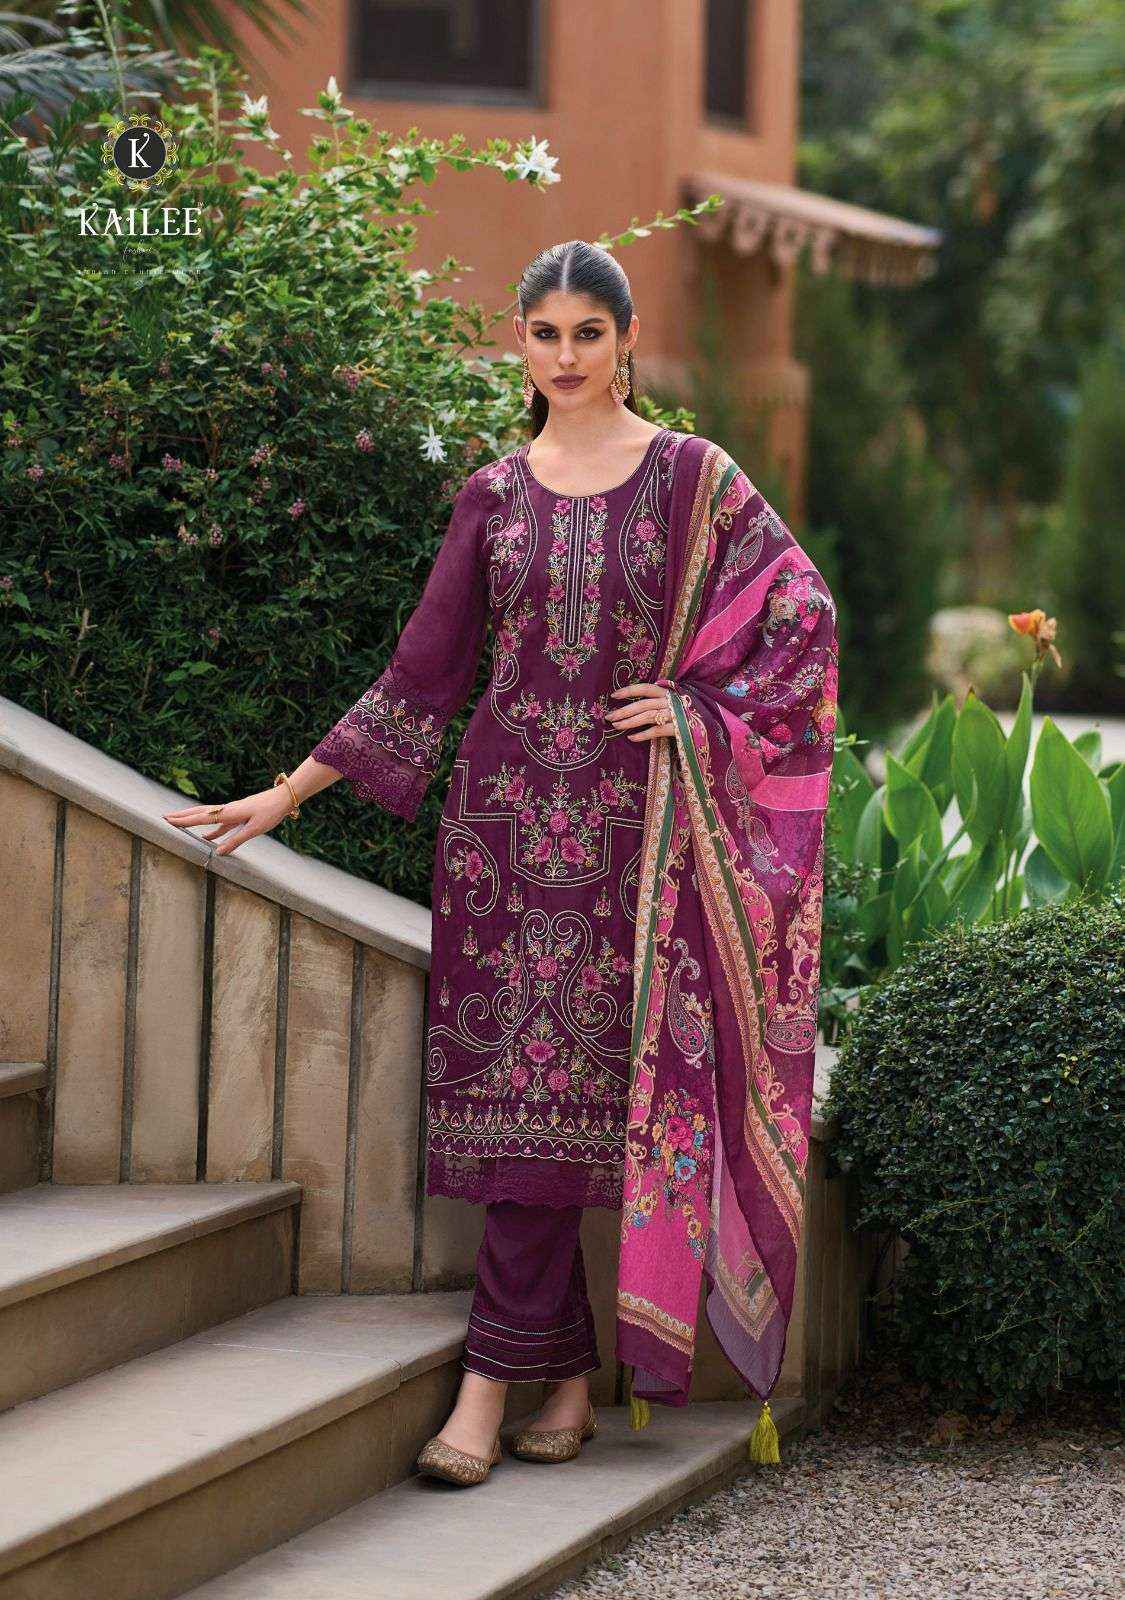 KAILEE FASHION SIFAARA DESIGNER READYMADE SUITS